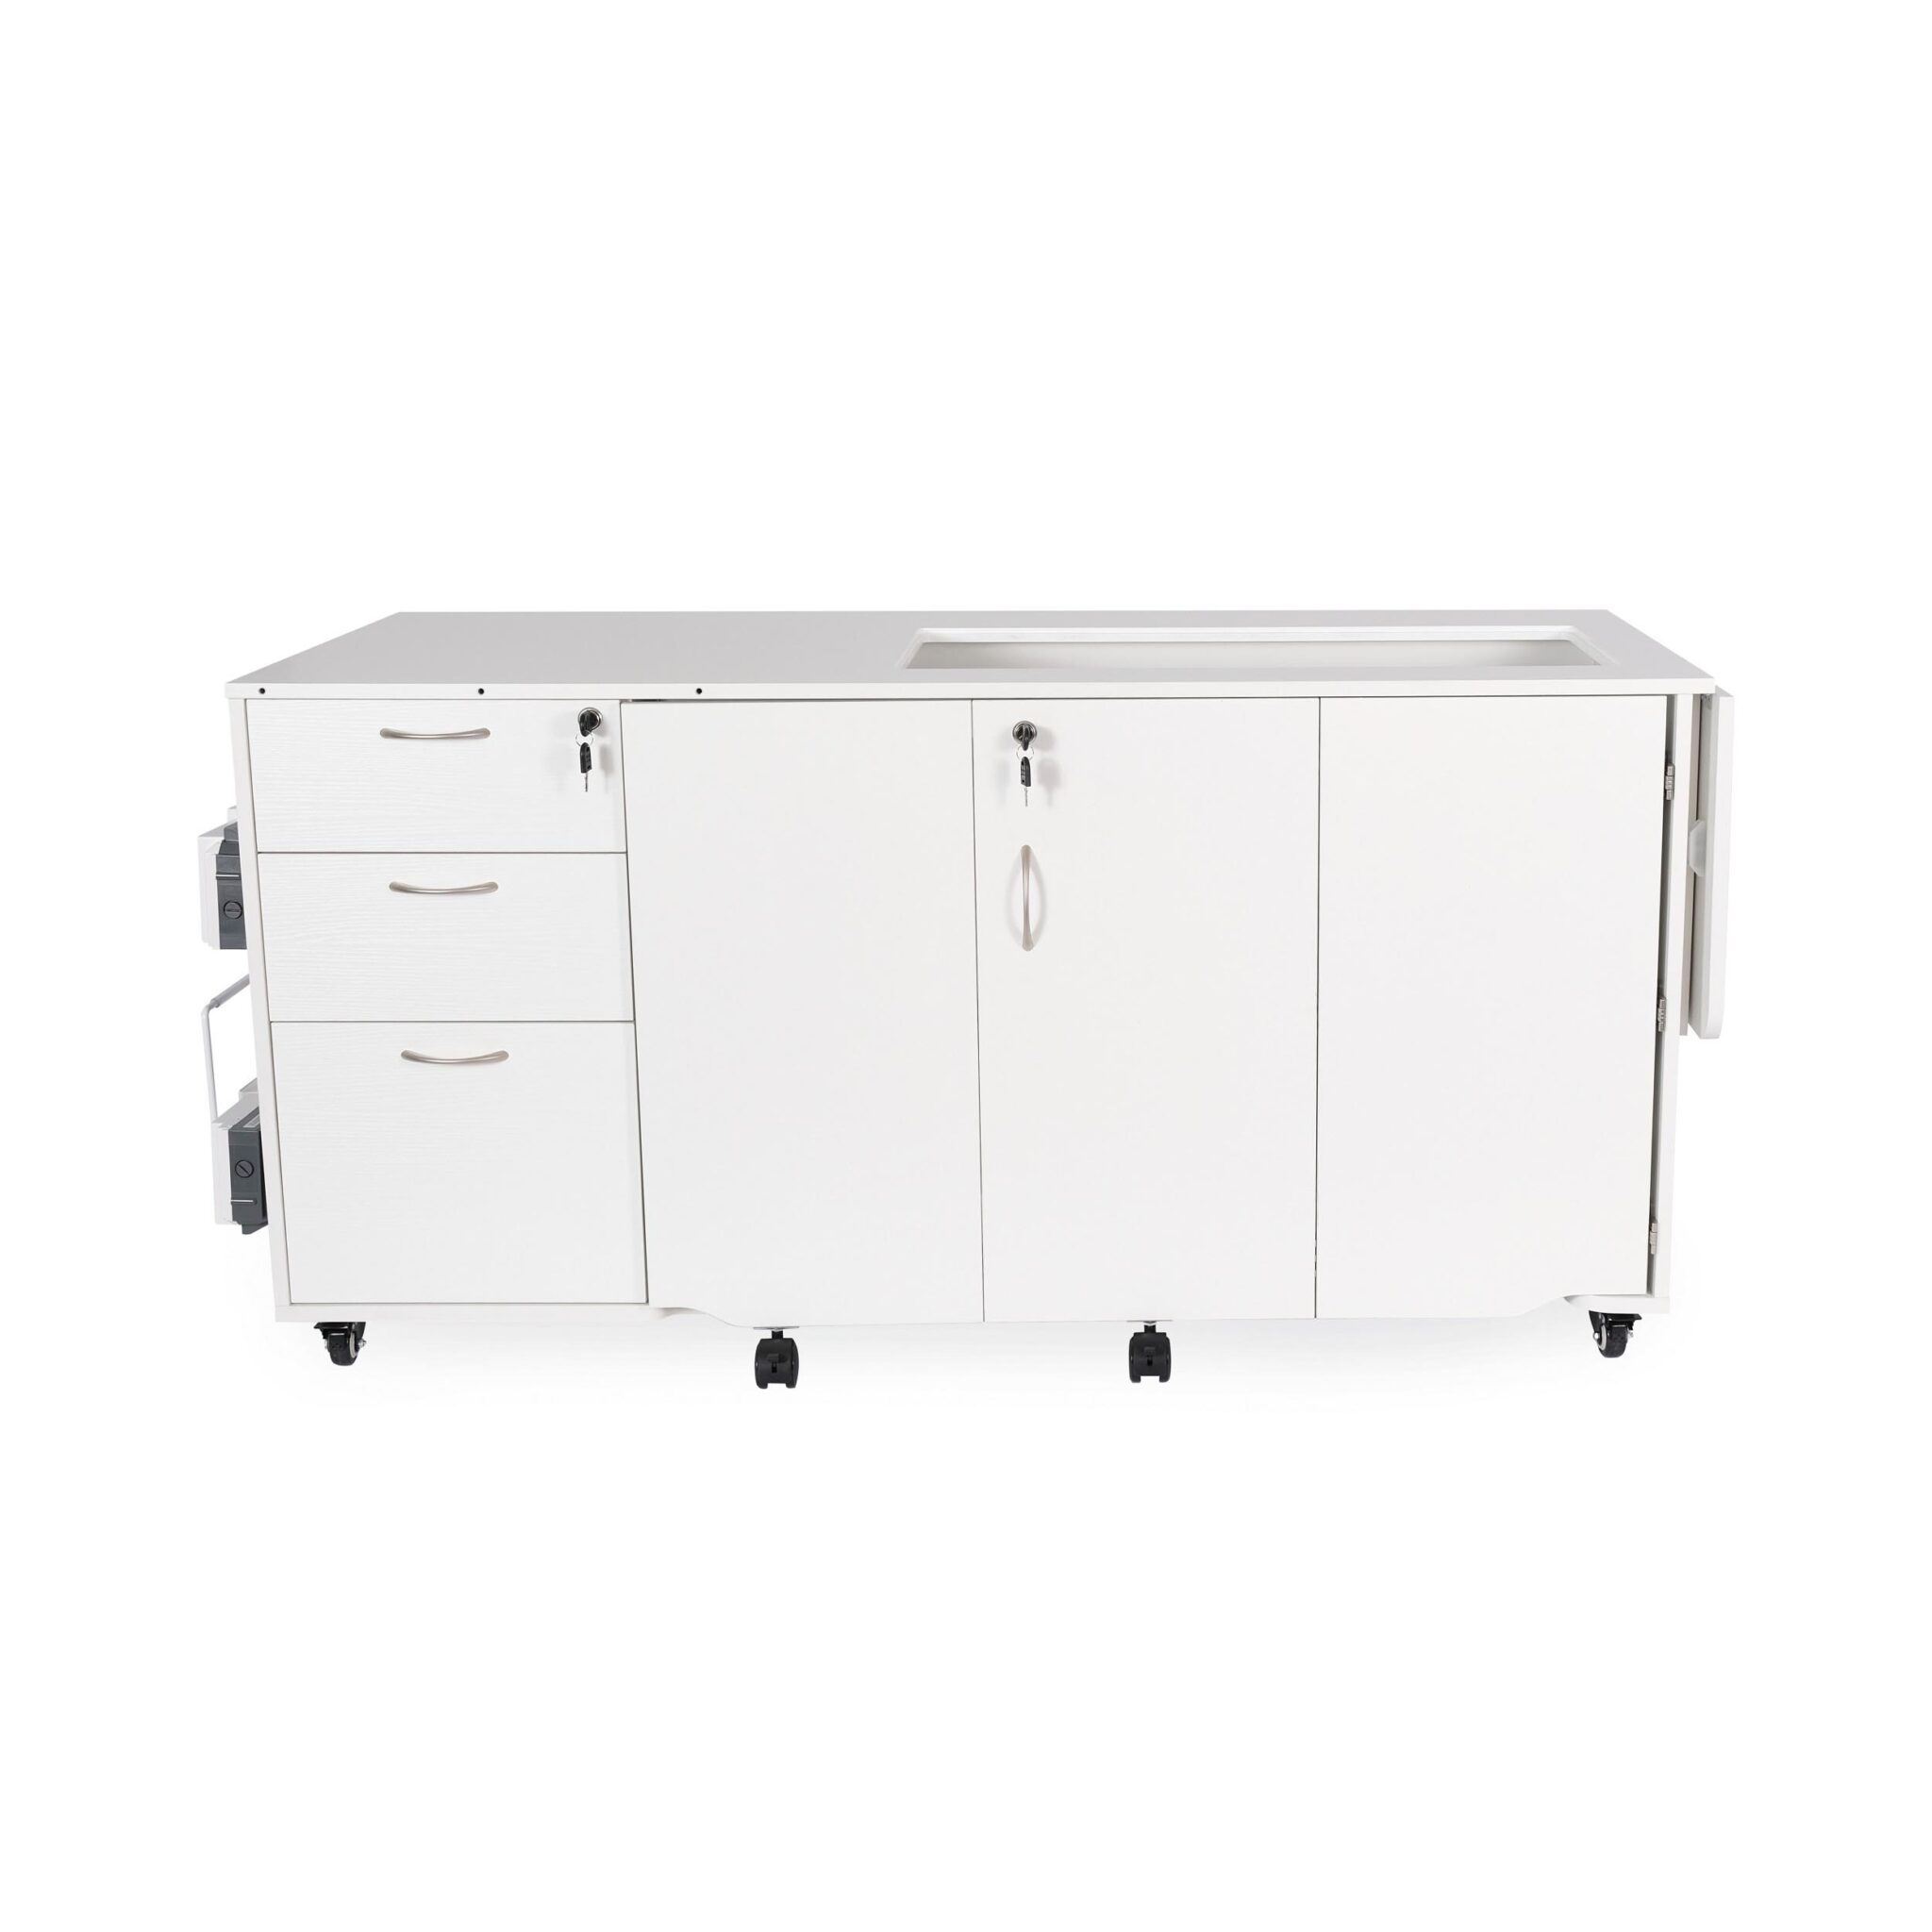 Sydney Electric Sewing Cabinet is designed with the largest premium machines in mind. The extra-large lift opening is available with hydraulic or electric lift hardware.